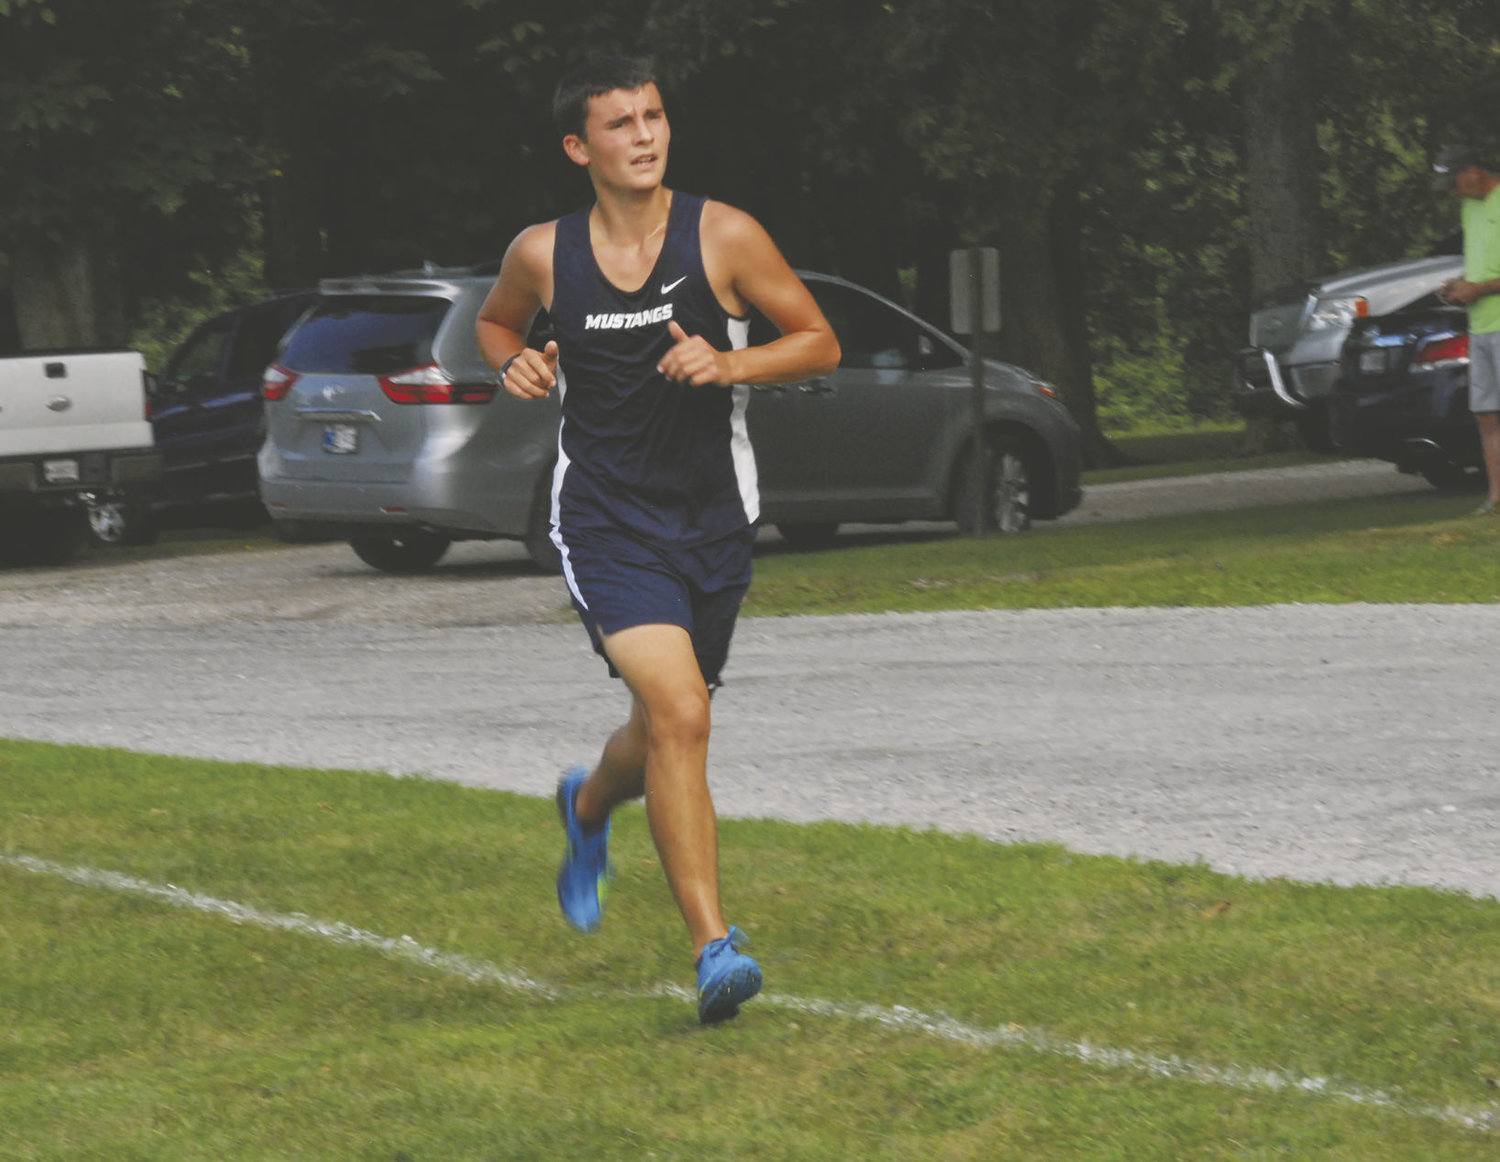 Fountain Central's boys took the top spot at Seeger's Hokum Karem after Seeger was disqualified.